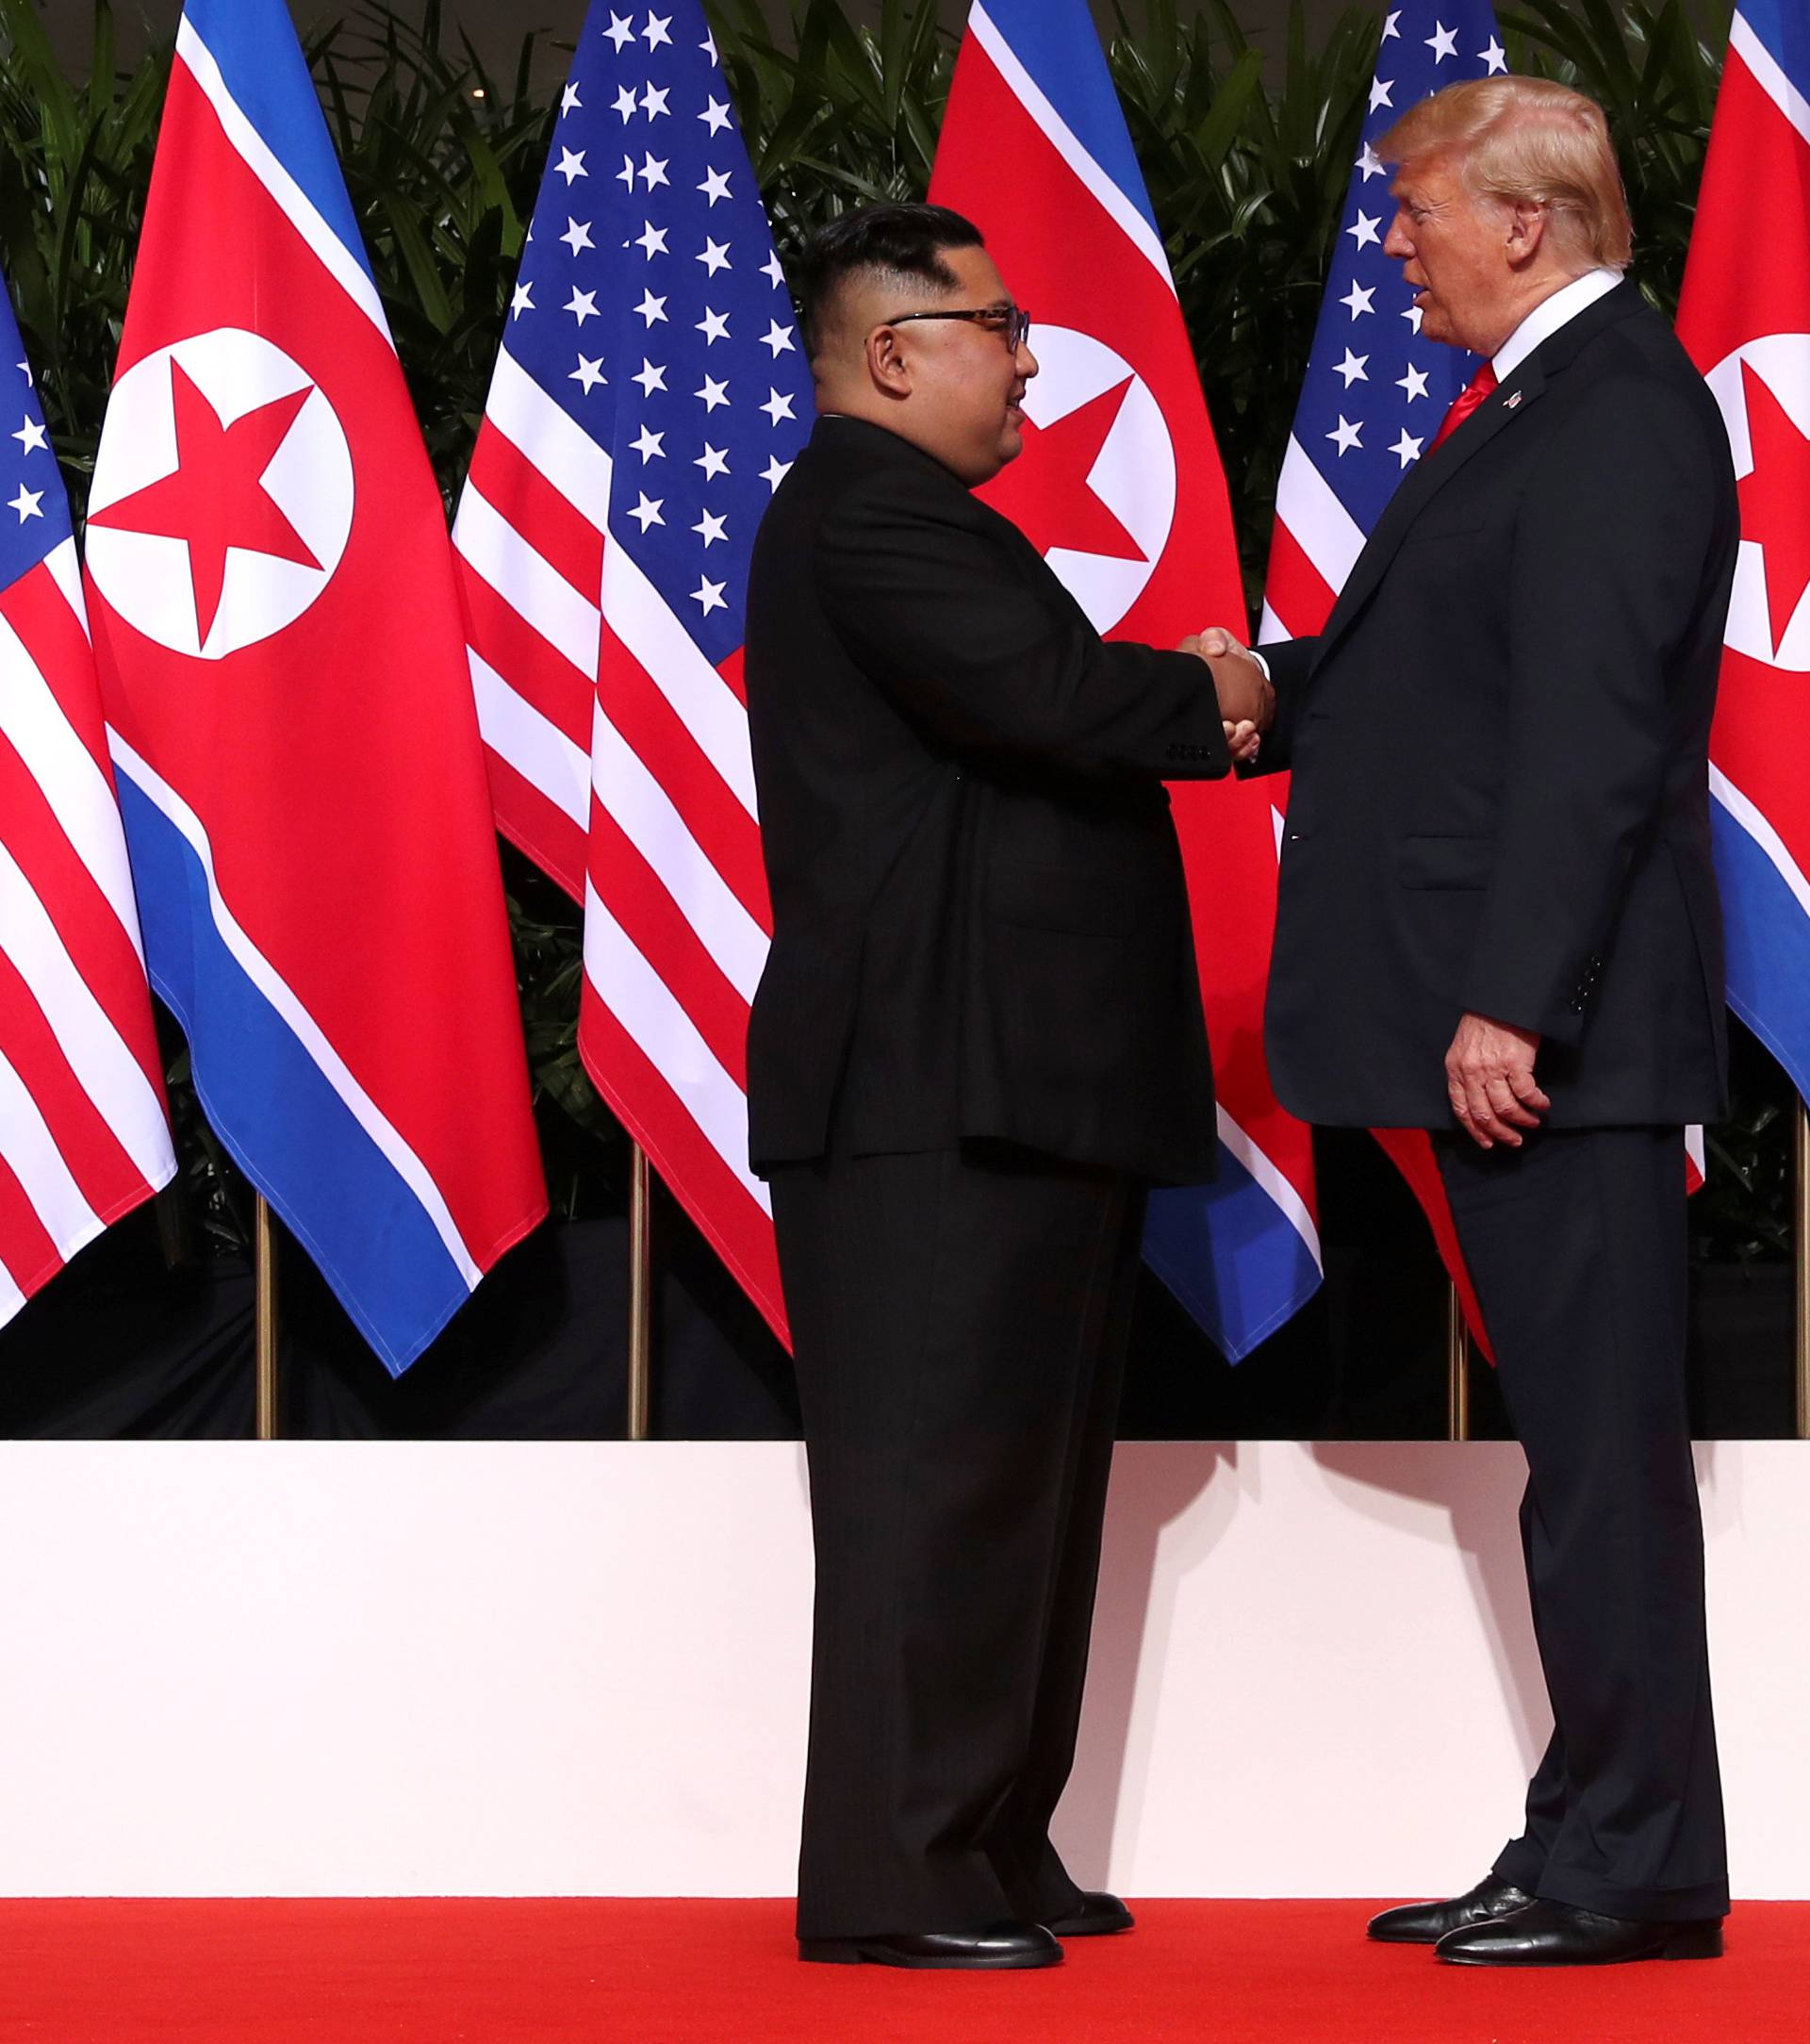 U.S. President Donald Trump and North Korea's leader Kim Jong Un shake hands during a summit at the Capella Hotel on the resort island of Sentosa, Singapore